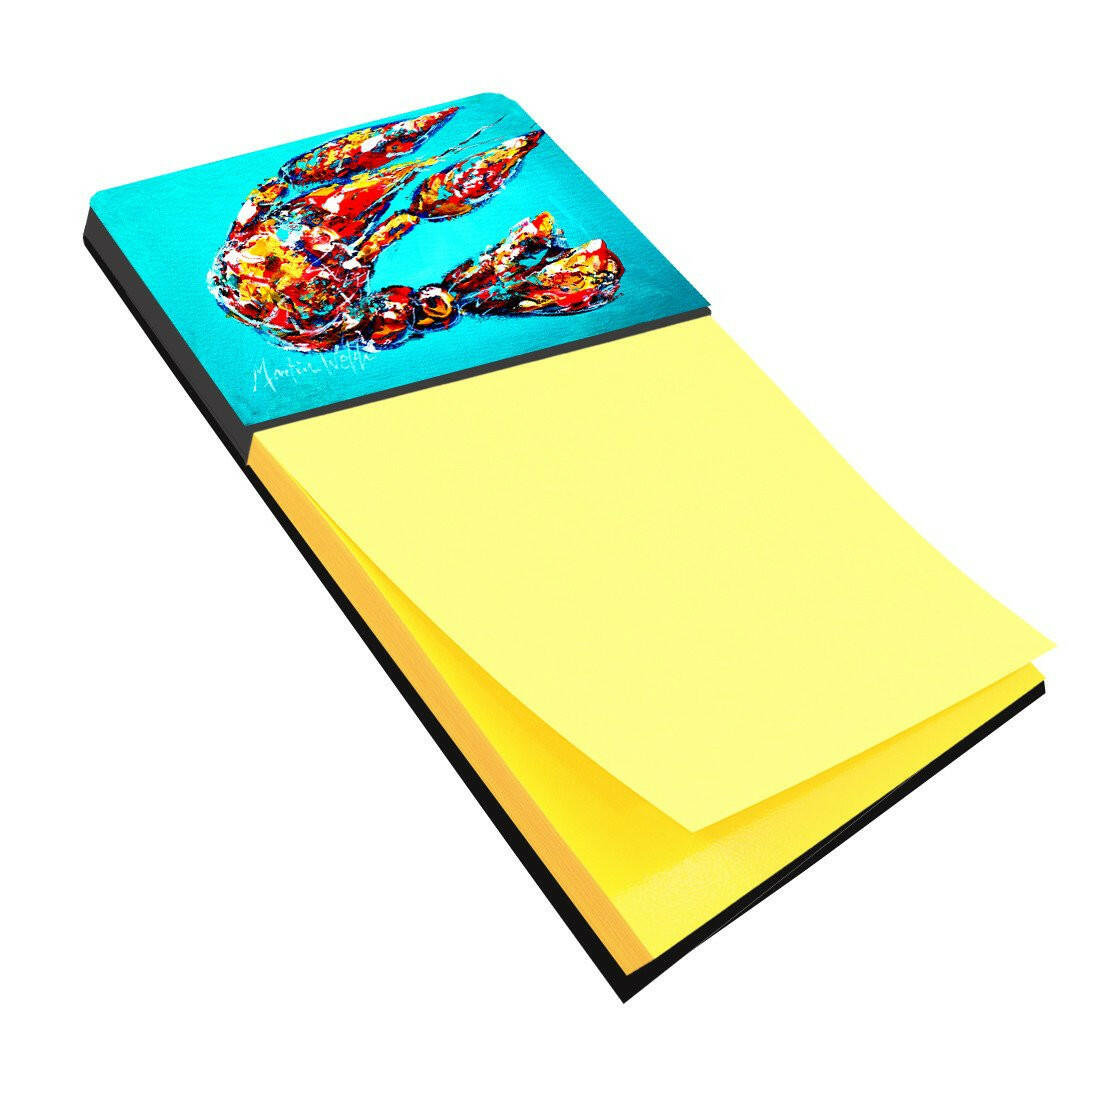 Lucy the Crawfish in blue Refiillable Sticky Note Holder or Postit Note Dispenser MW1161SN by Caroline's Treasures